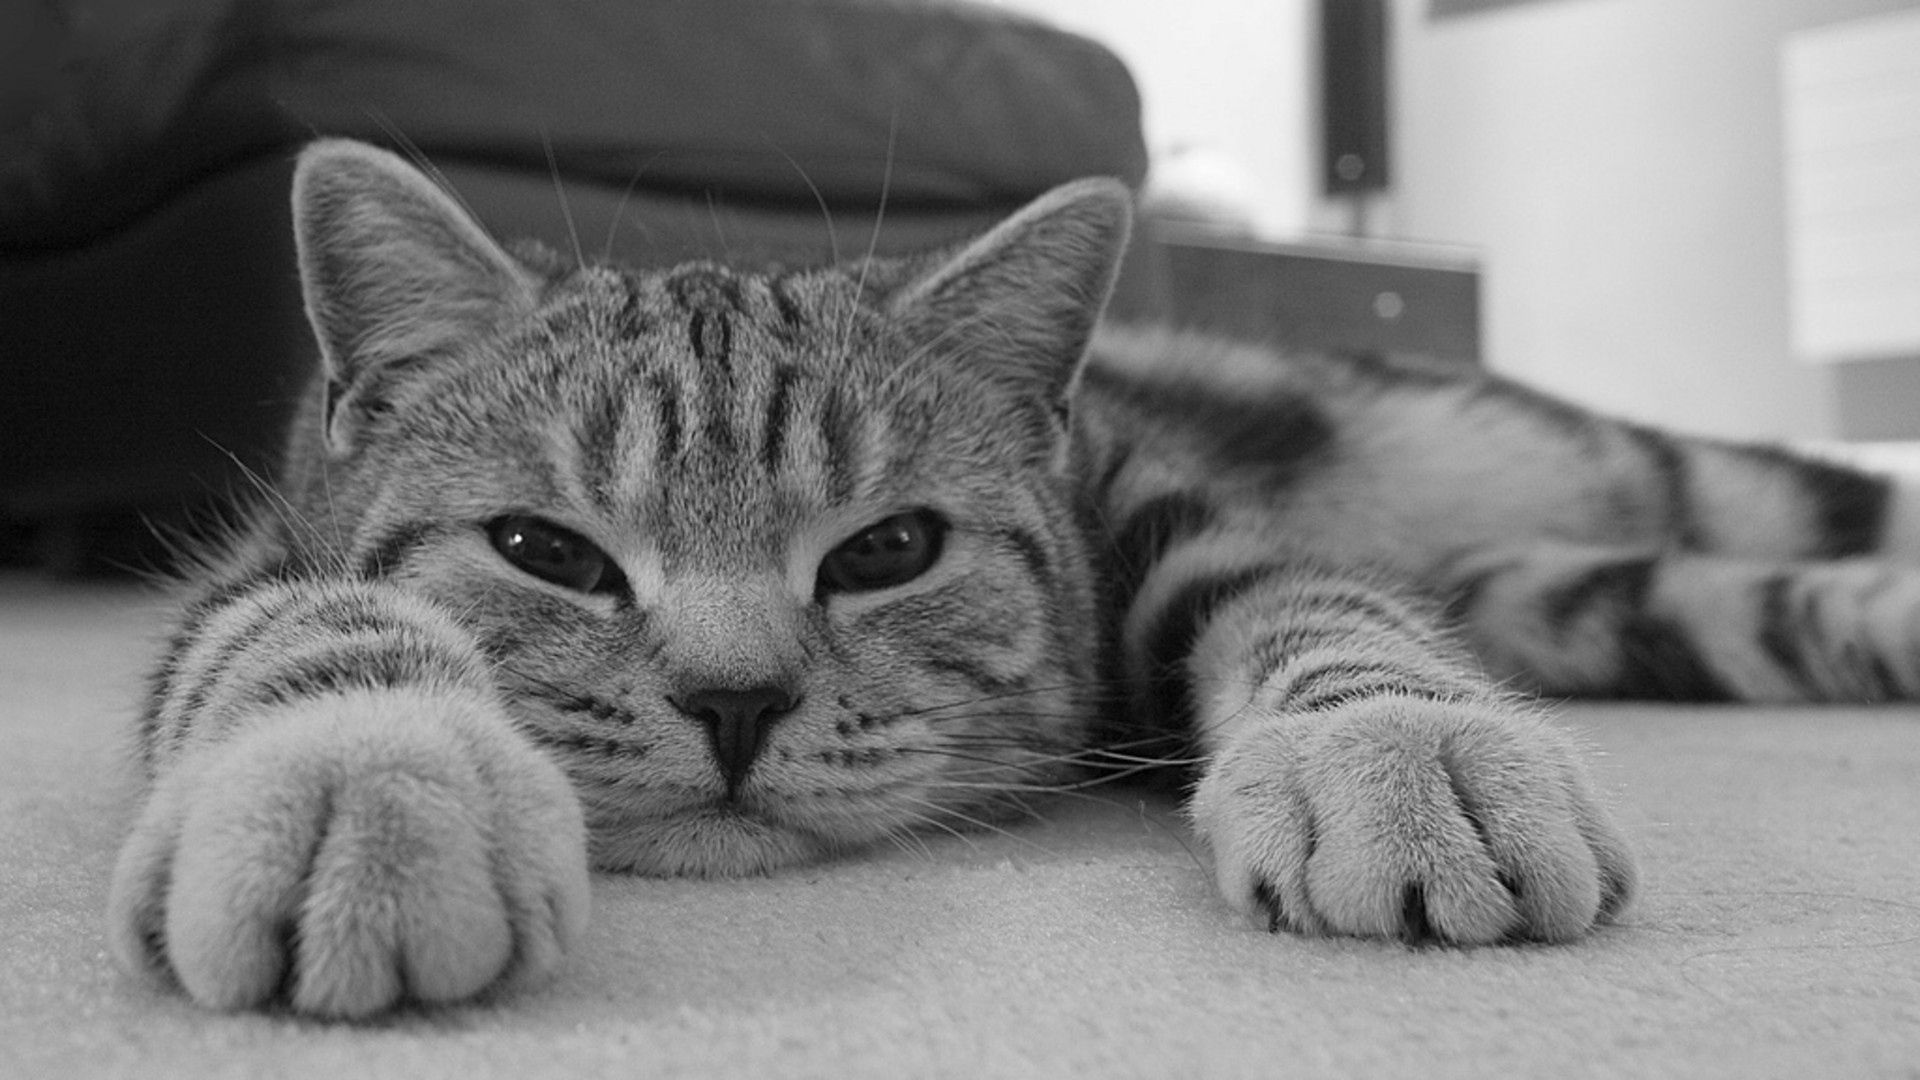 vertical wallpaper relaxation, eyes, animals, cat, muzzle, striped, rest, bw, chb